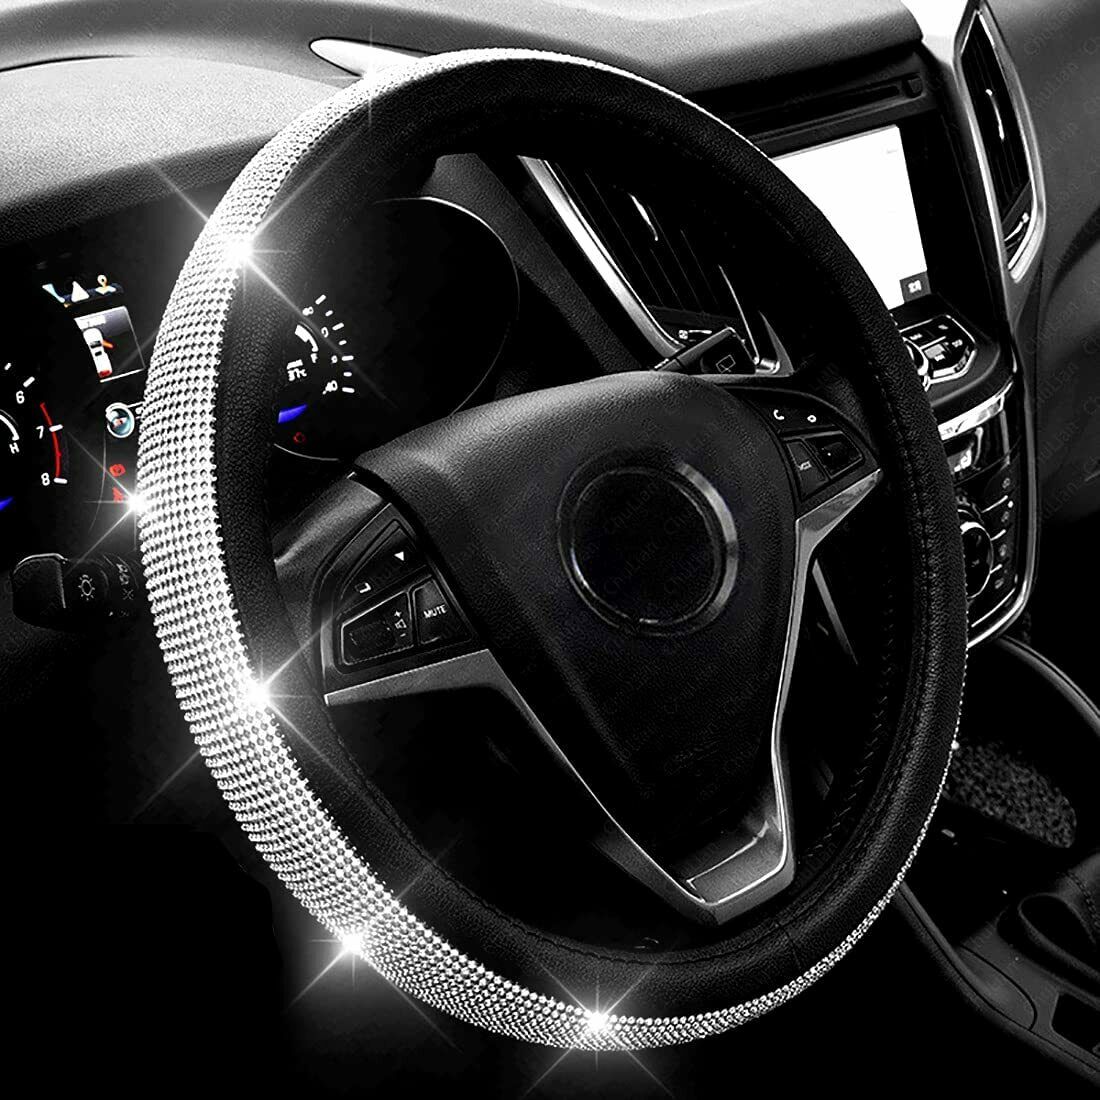 New Diamond Leather Steering Wheel Cover, Fit 15 Inch Car Wheel